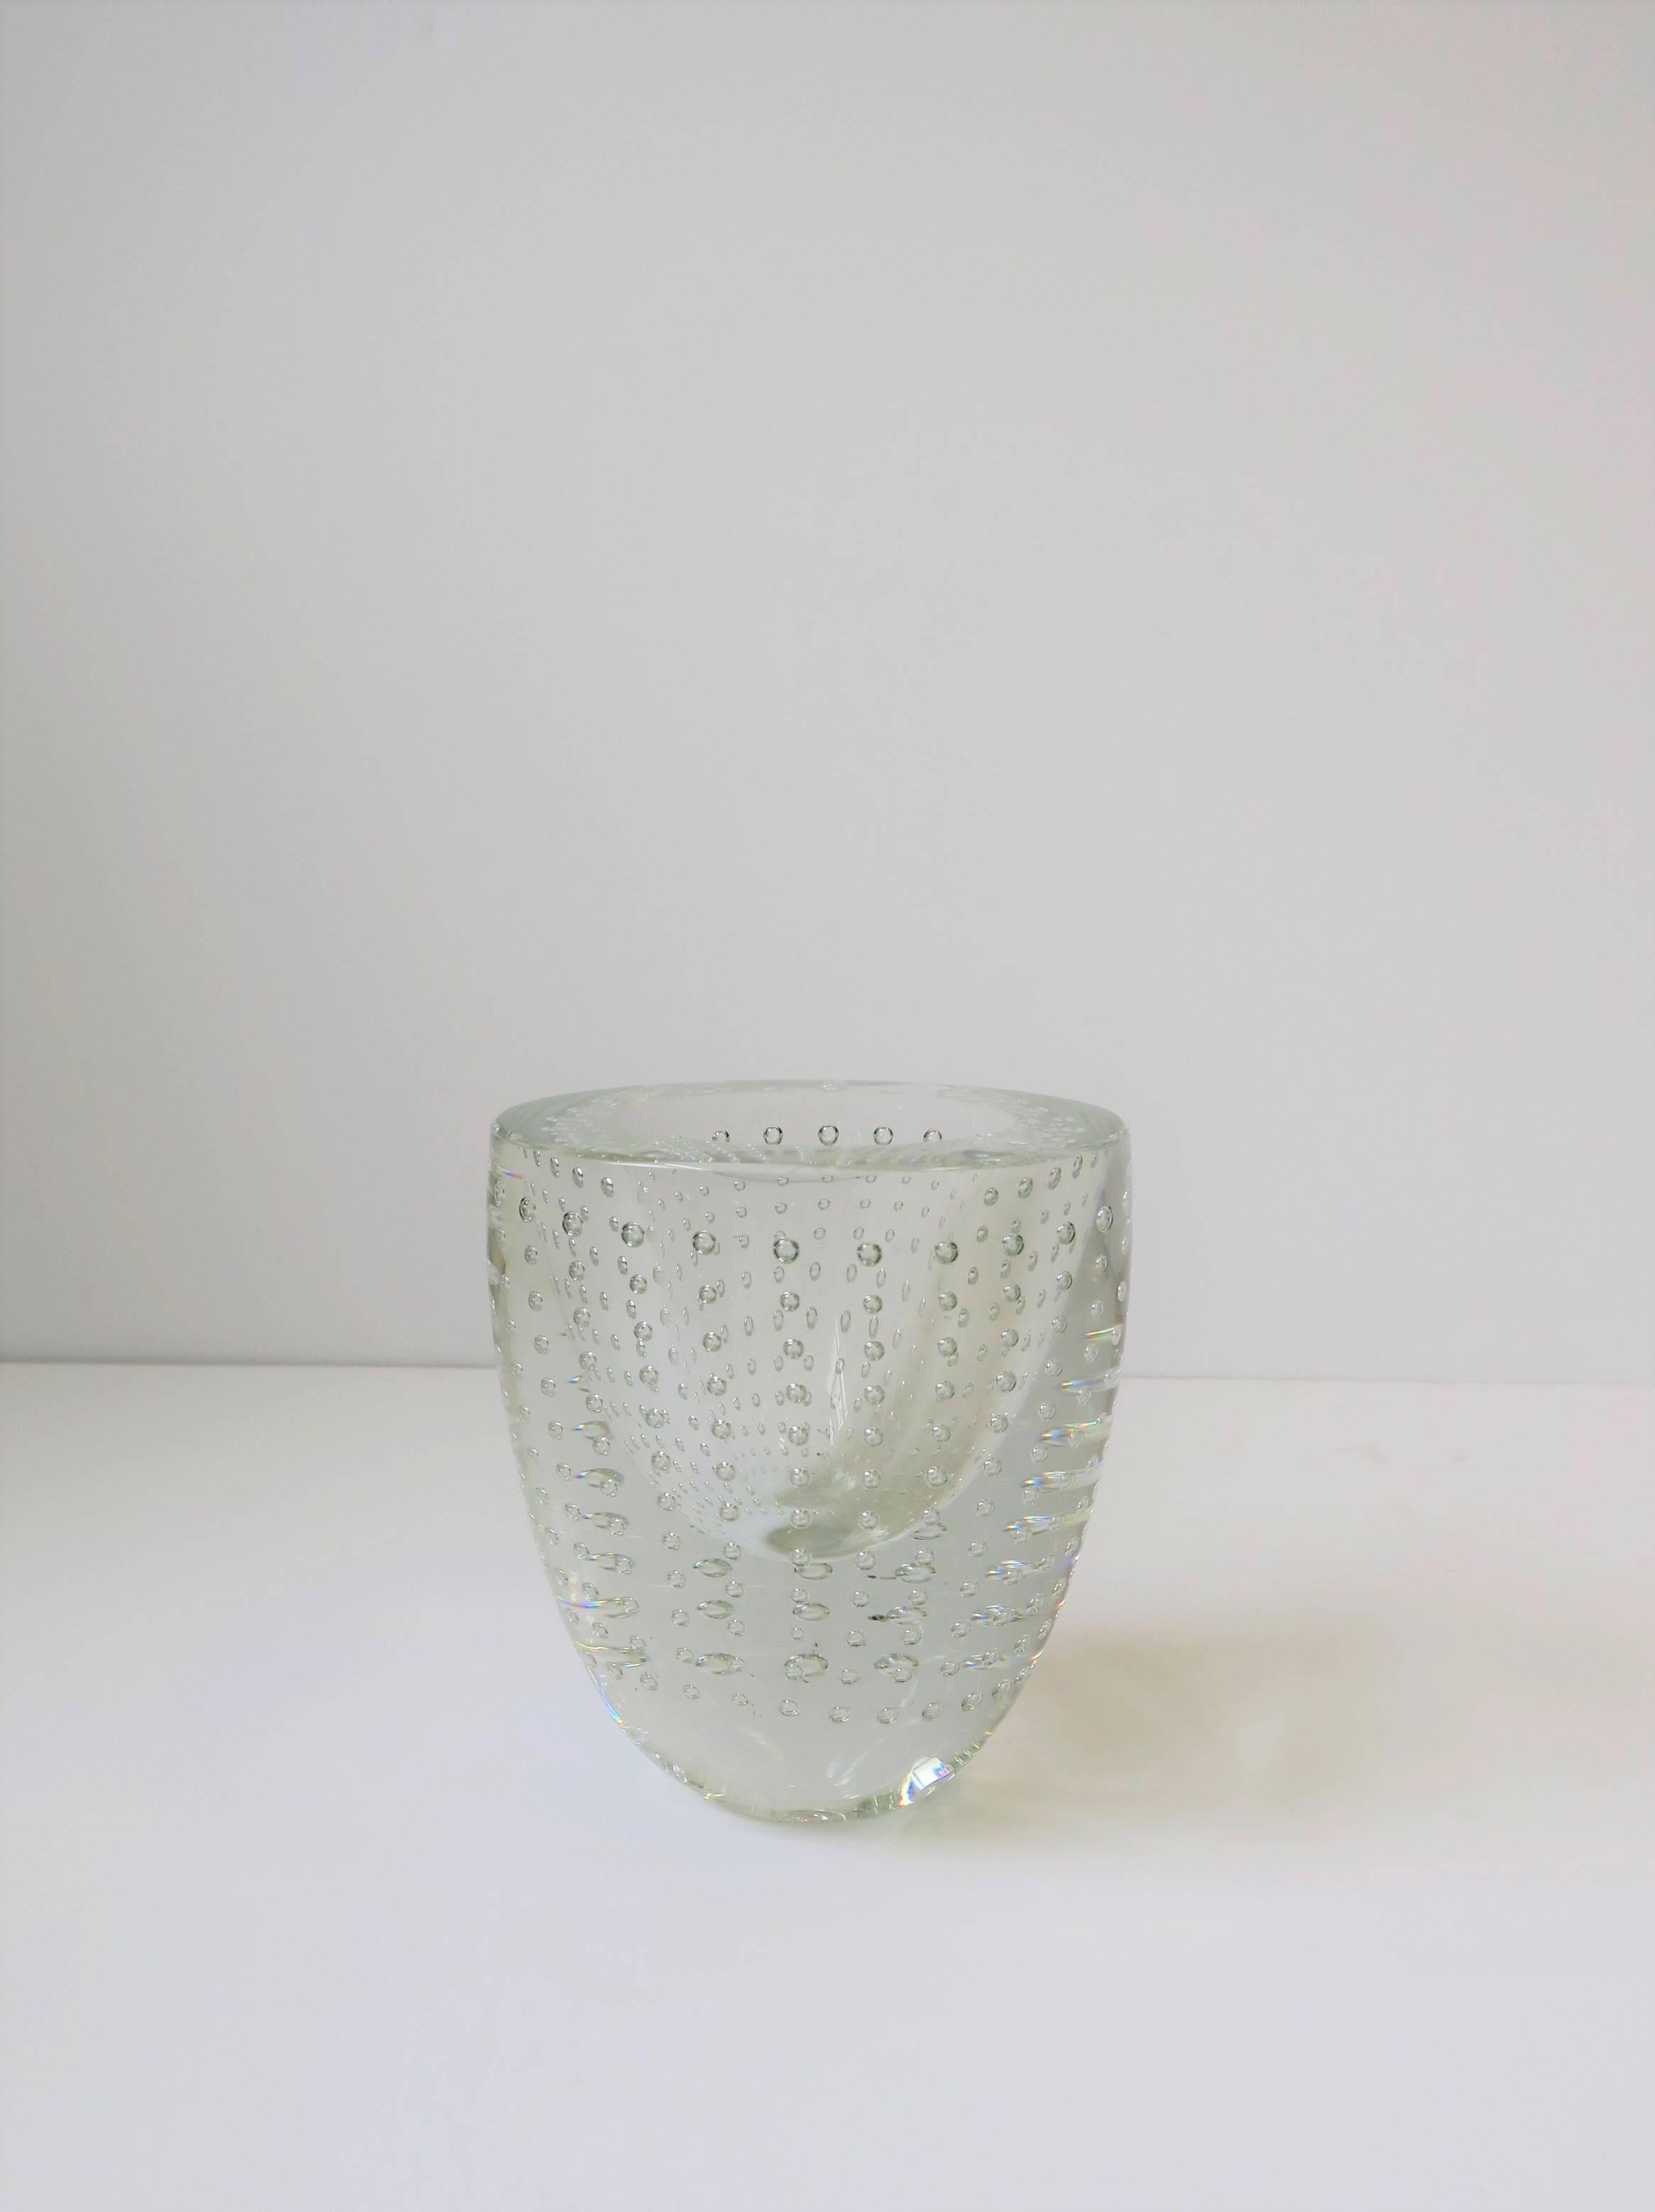 A beautiful and substantial clear studio art glass vase with a controlled bubble design, by artist and sculptor Leon Applebaum. Beautiful with or without flowers. Signed on bottom as show in image #10. Vase thickness almost 1